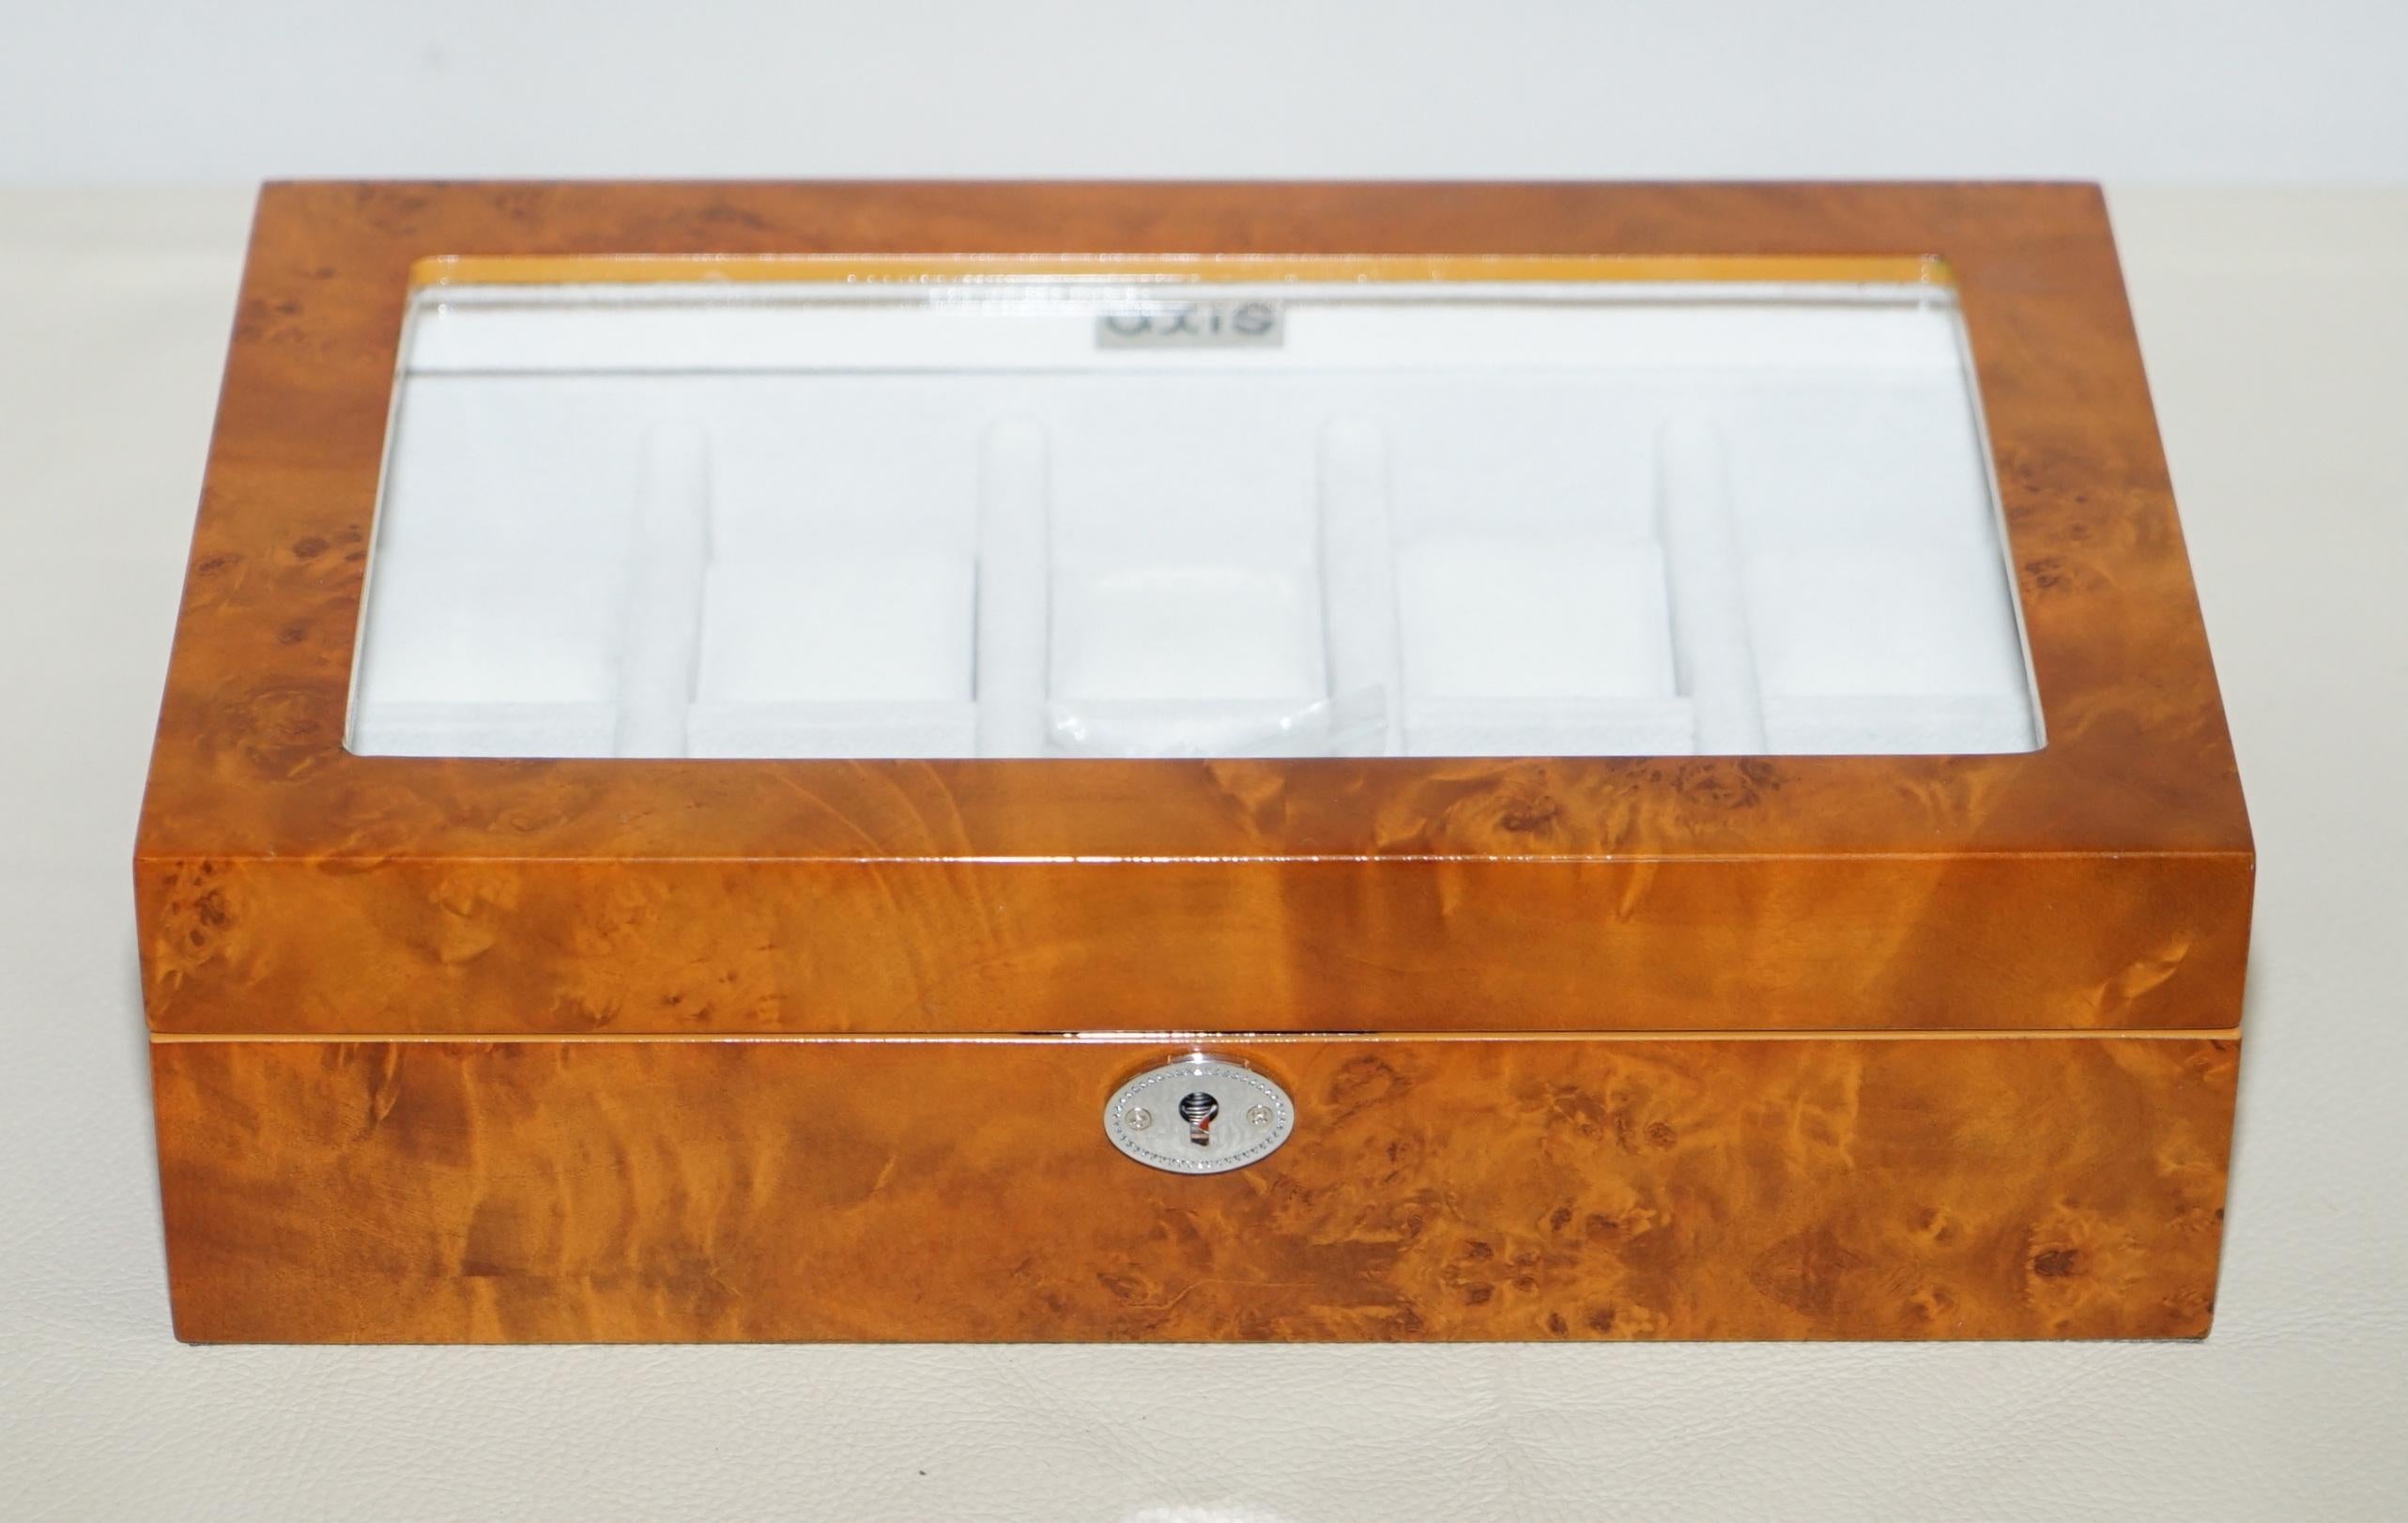 We are delighted to offer for sale this brand new burr walnut watch display case

This was a very generous unwanted gift, all my watches are in the bank!

It can hold 10 watches in style and luxury, the case is lockable

Dimensions:

Height